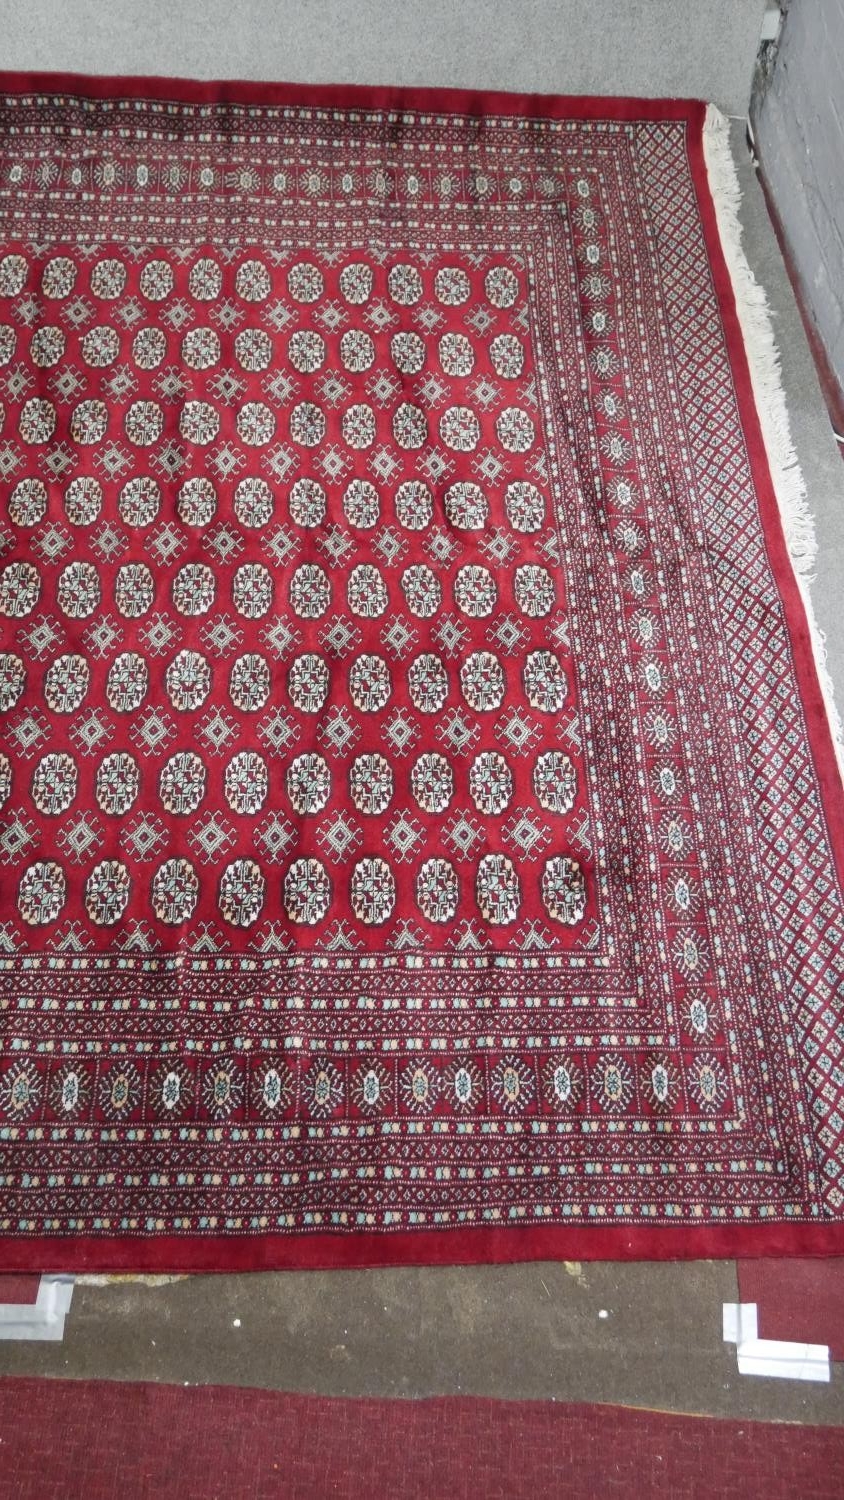 A Bokhara carpet with repeating gul motifs on a burgundy ground within multiple borders. L.358 W. - Image 2 of 5